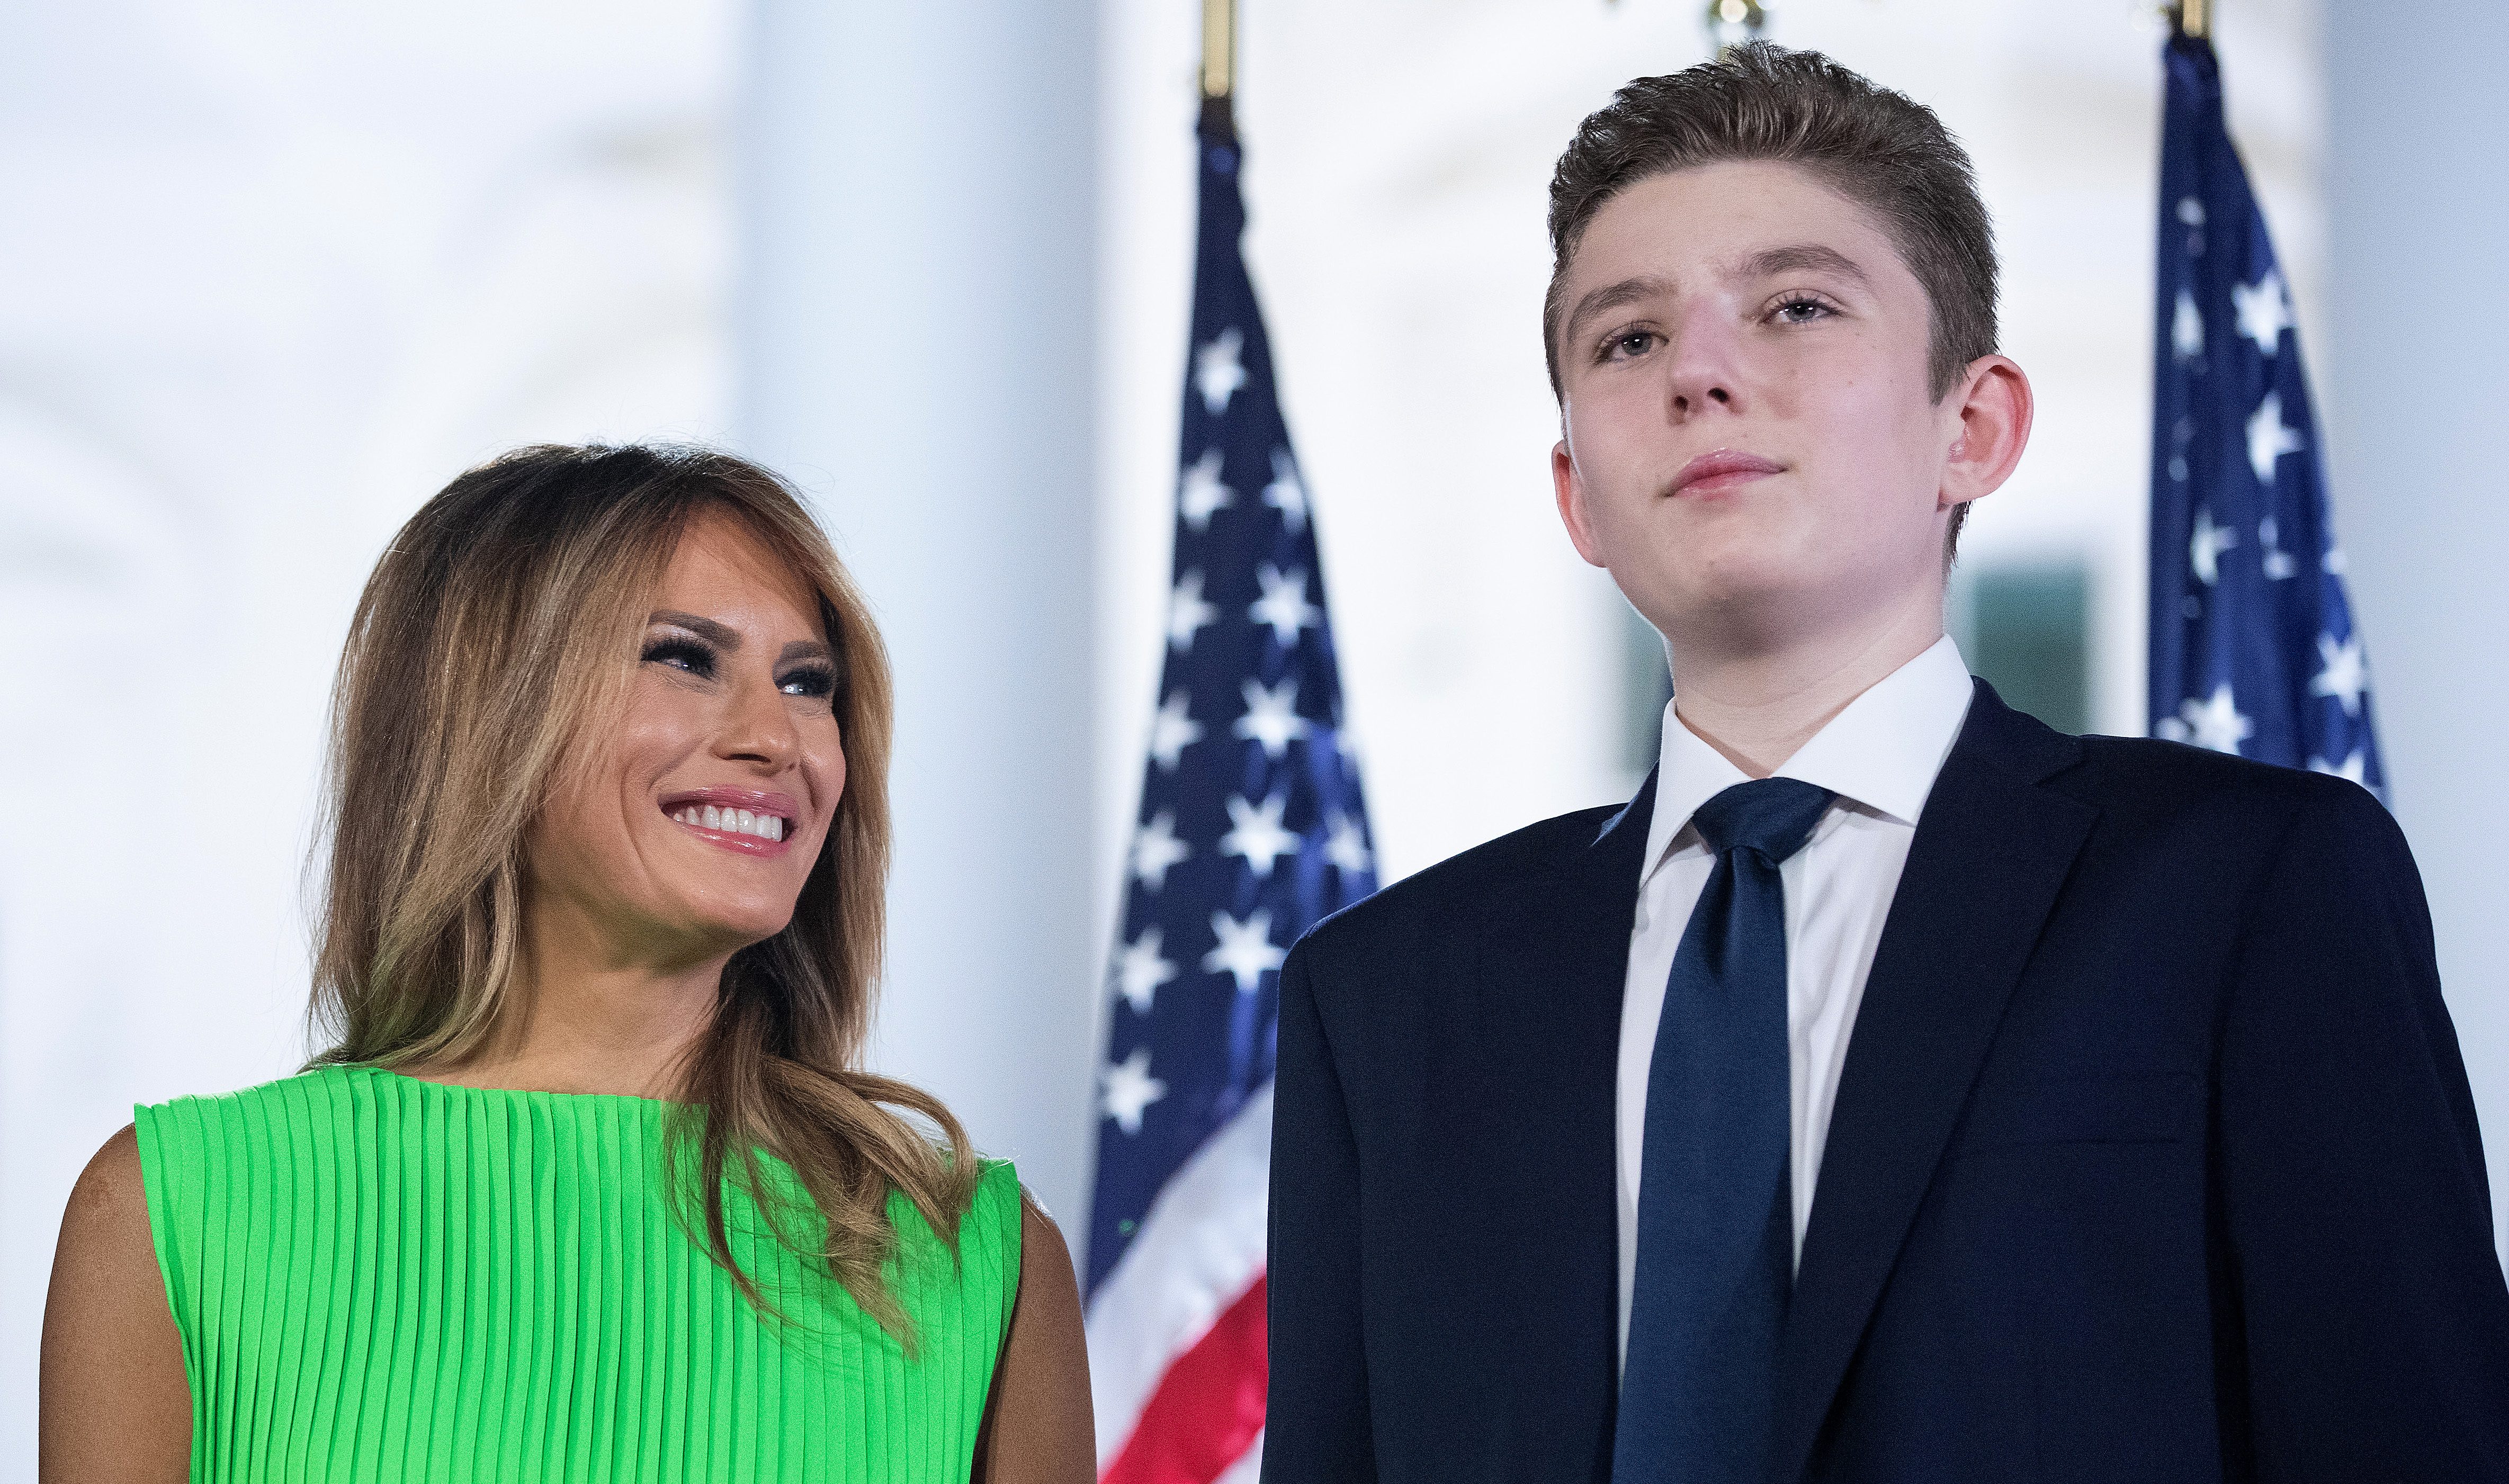 Barron Trump declines invitation to be a delegate at the Republican
National Convention